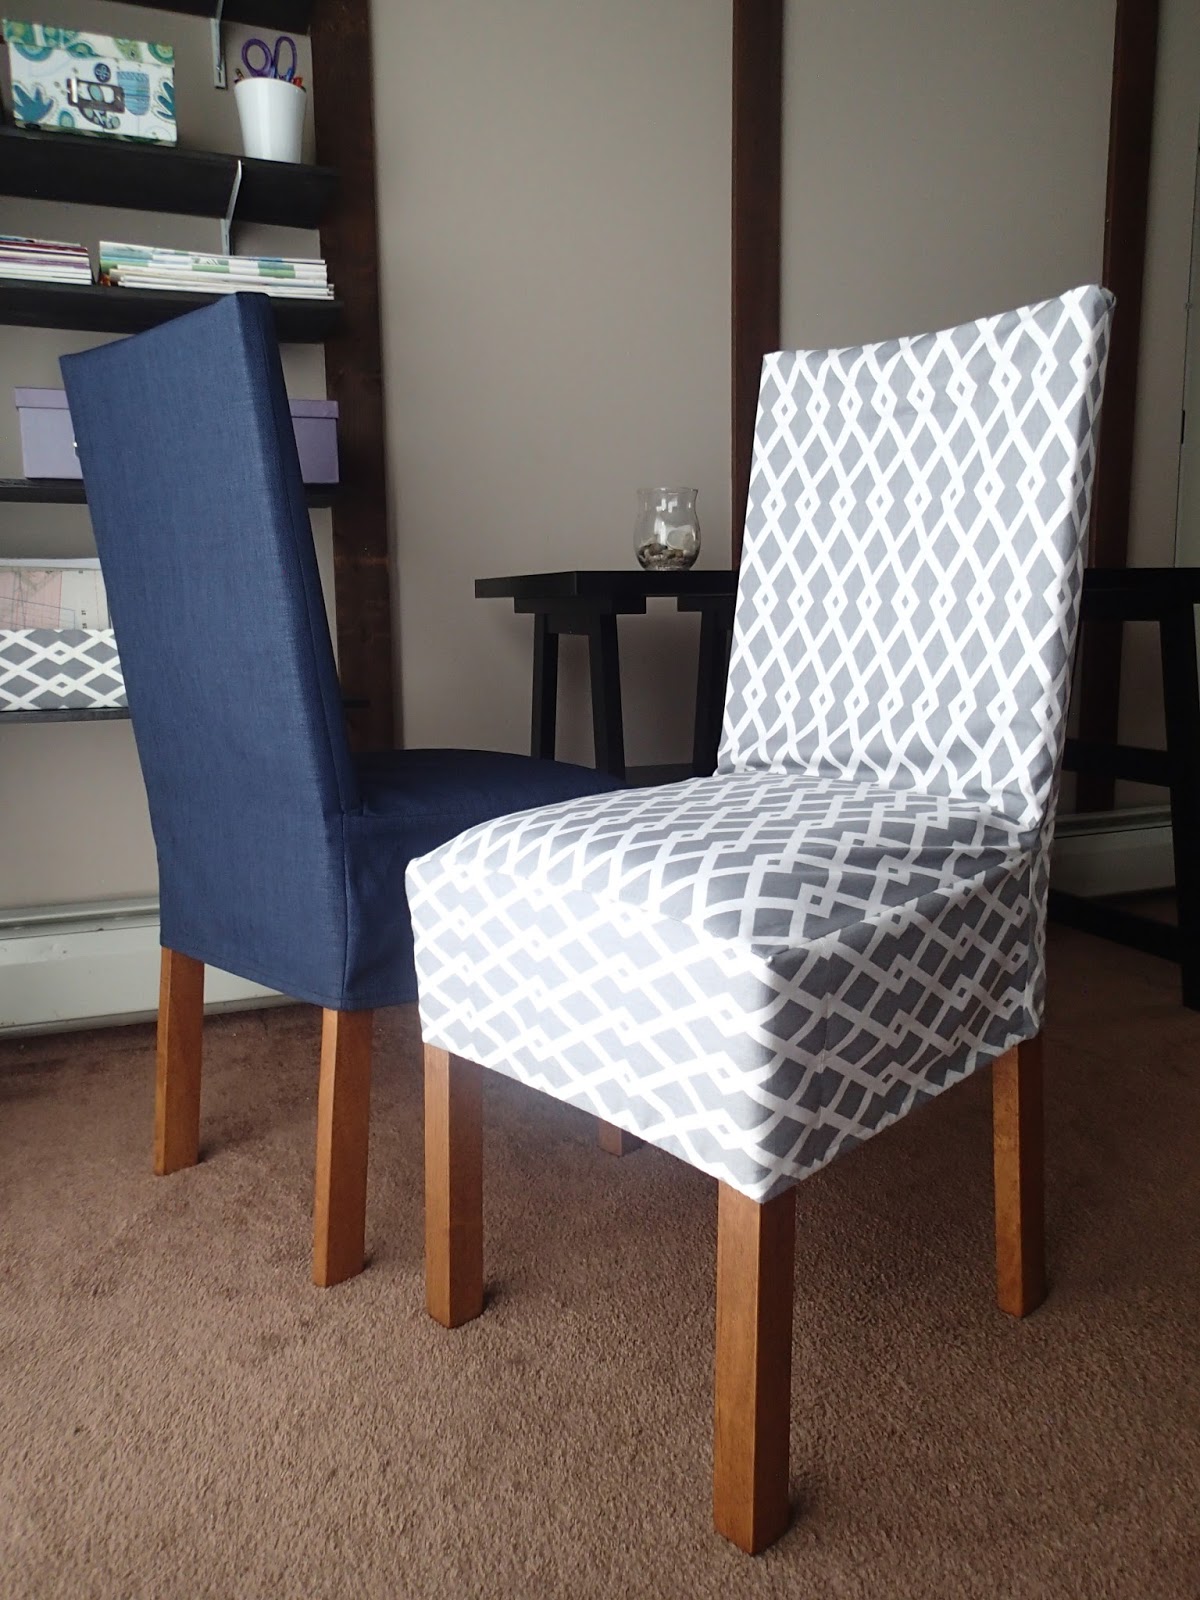 My Little Girl's Dress and more: DIY: How To Make a Chair ...